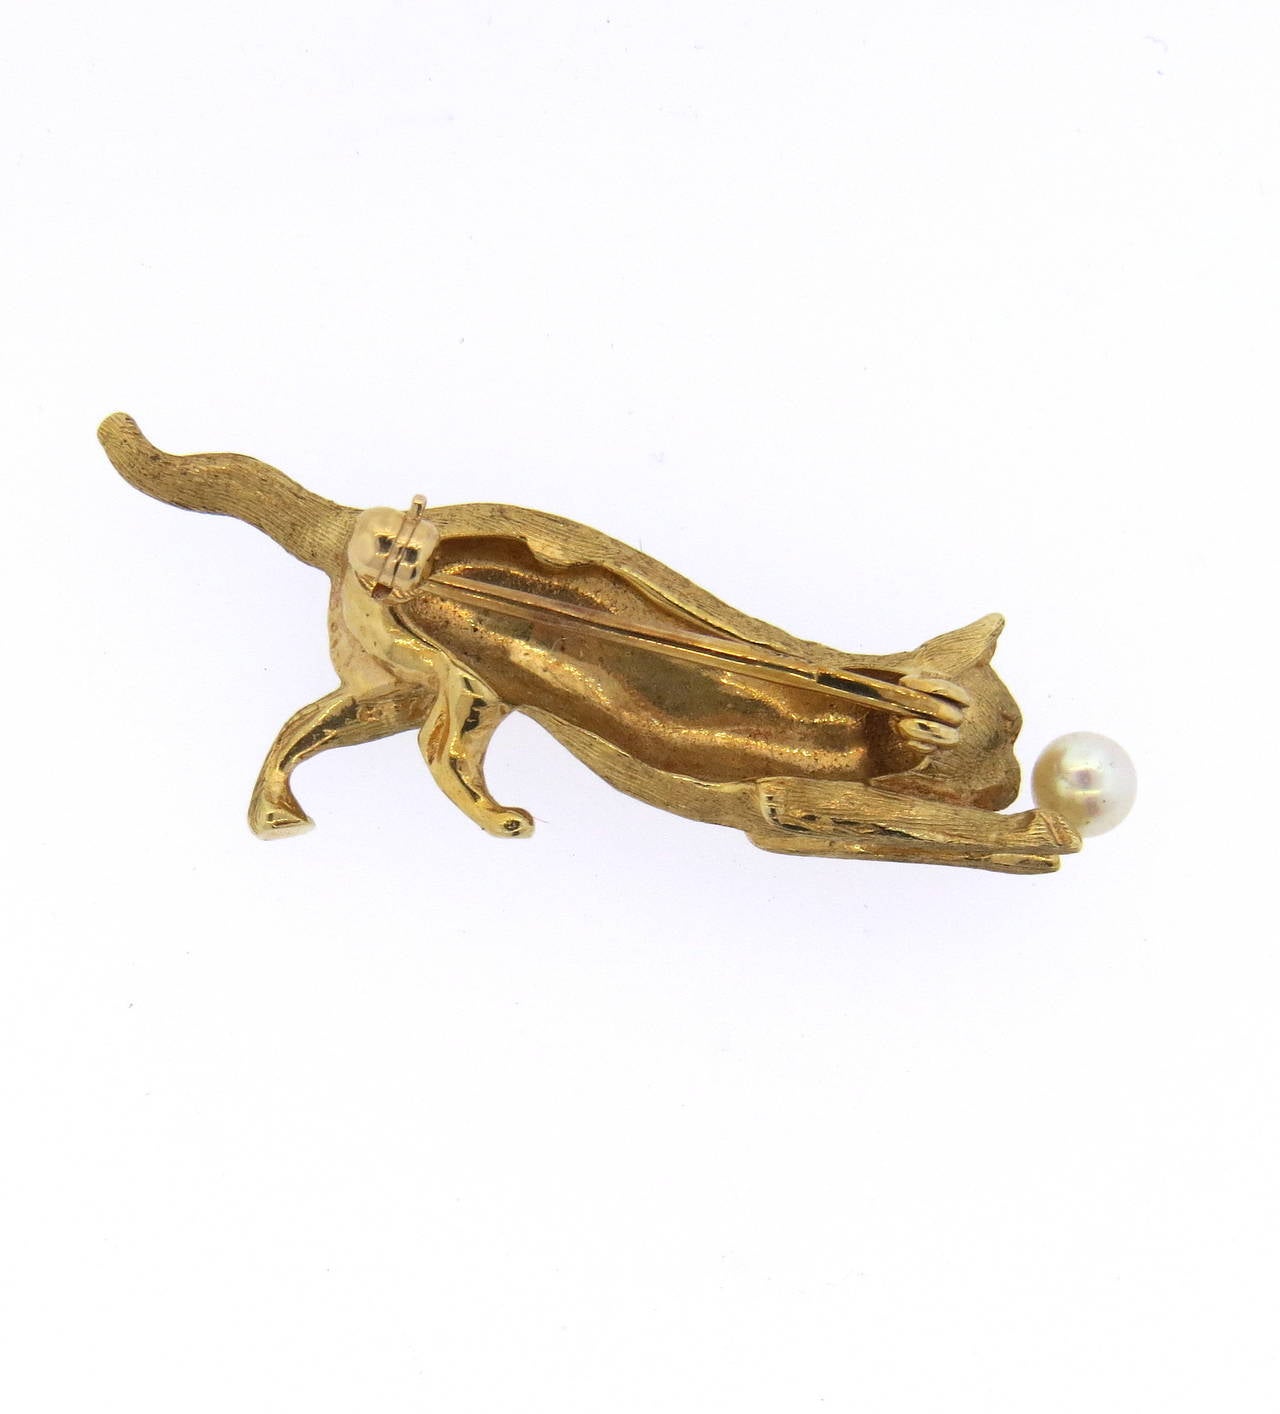 Whimsical vintage brooch, crafted in 14k brushed finish gold, featuring playing cat with a 3.9mm pearl. Piece measures 40mm x 15mm and weights 7.7 grams